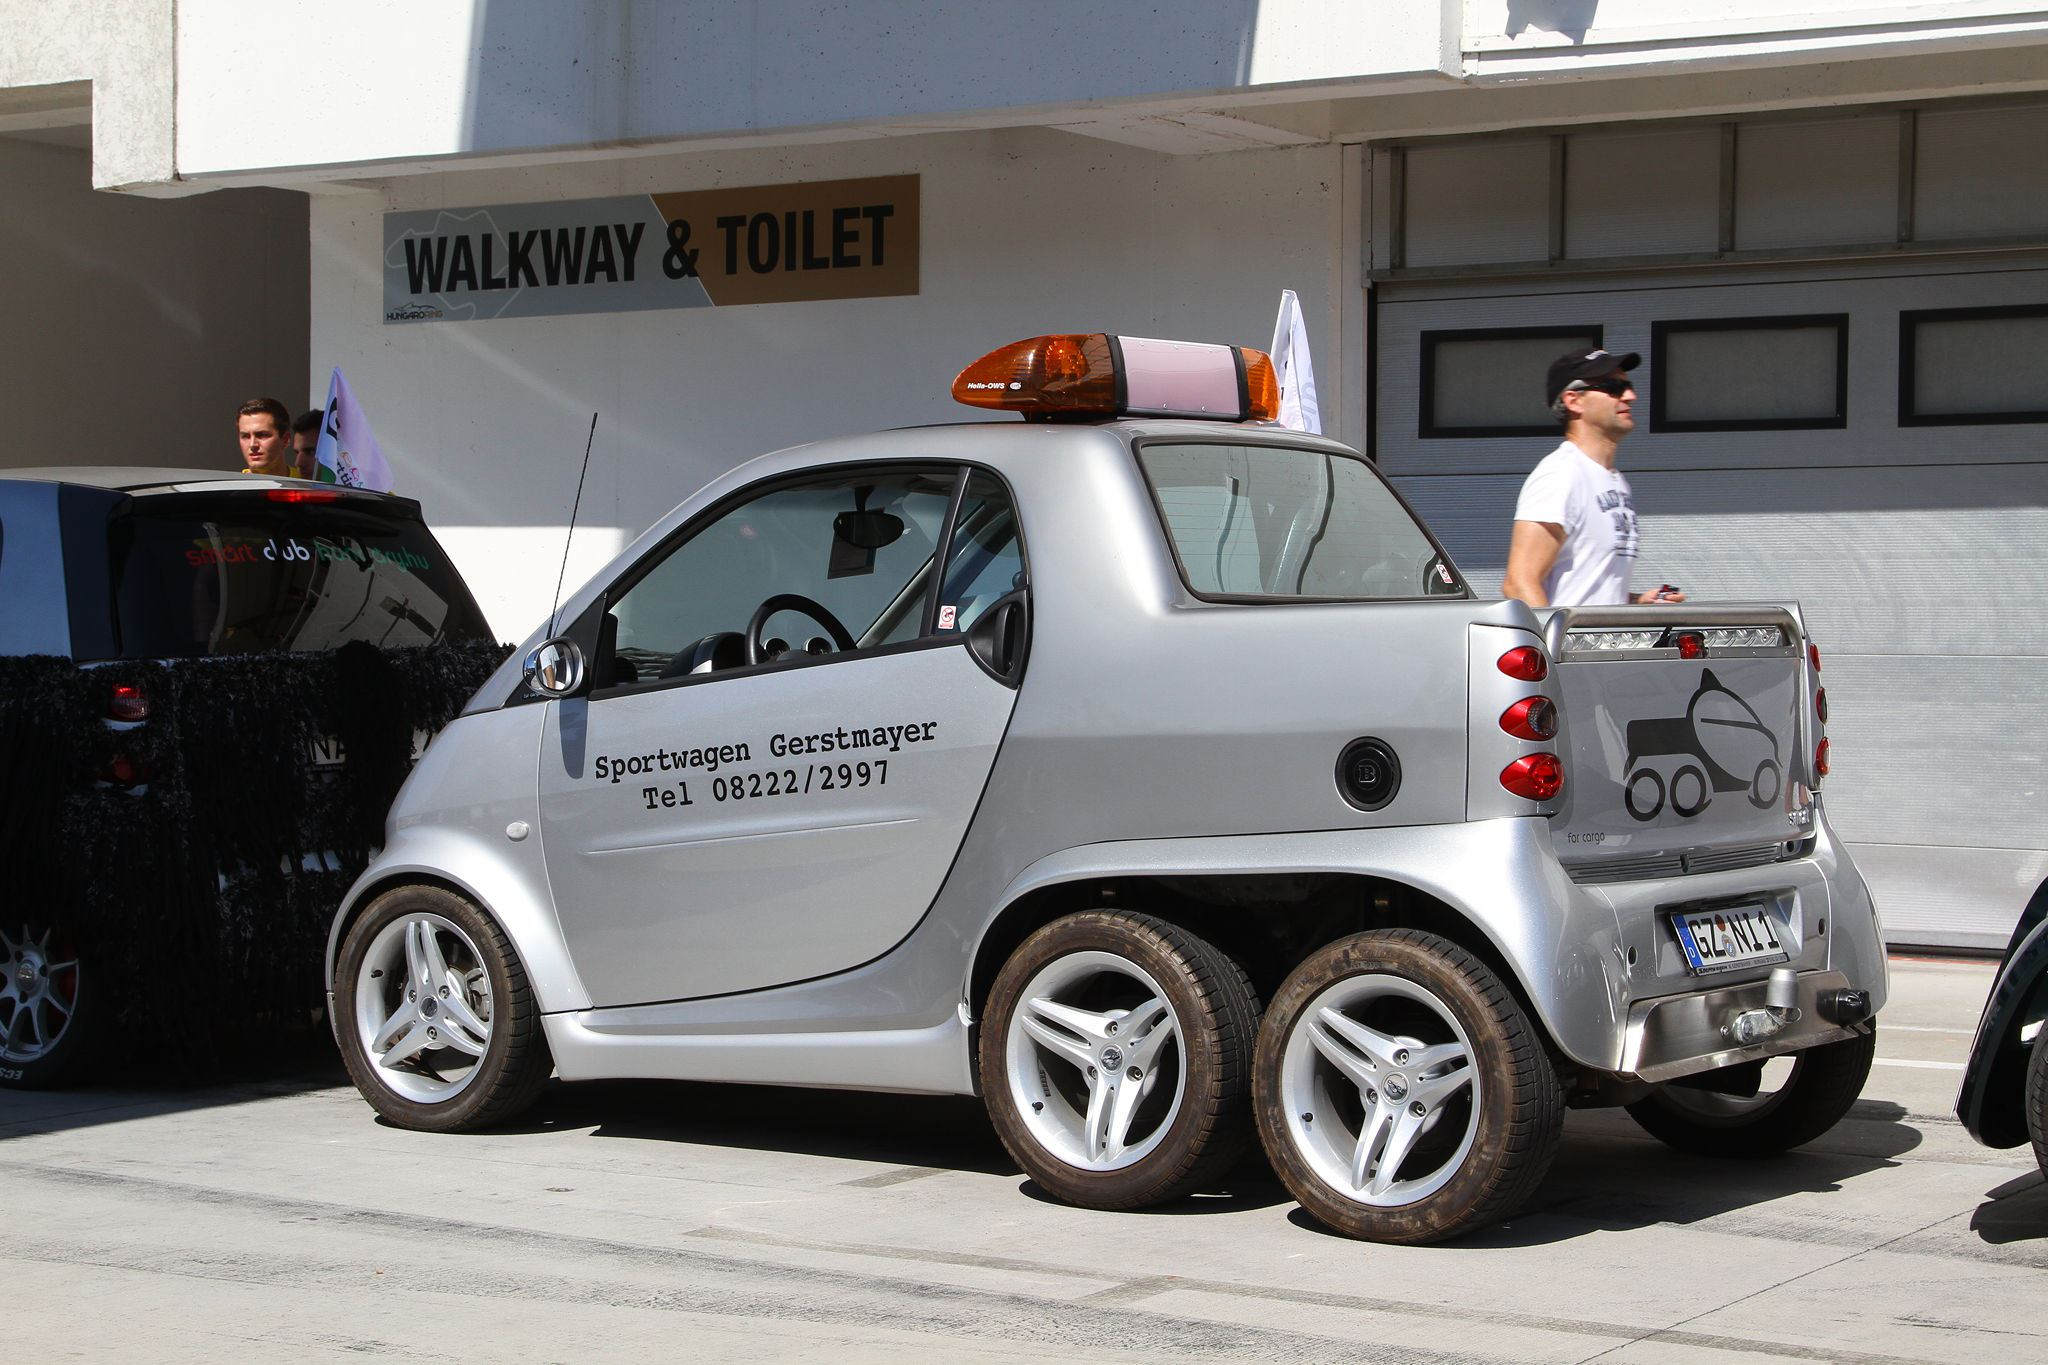 2048x1365 Check Out This Awesome Parade of Smart Cars